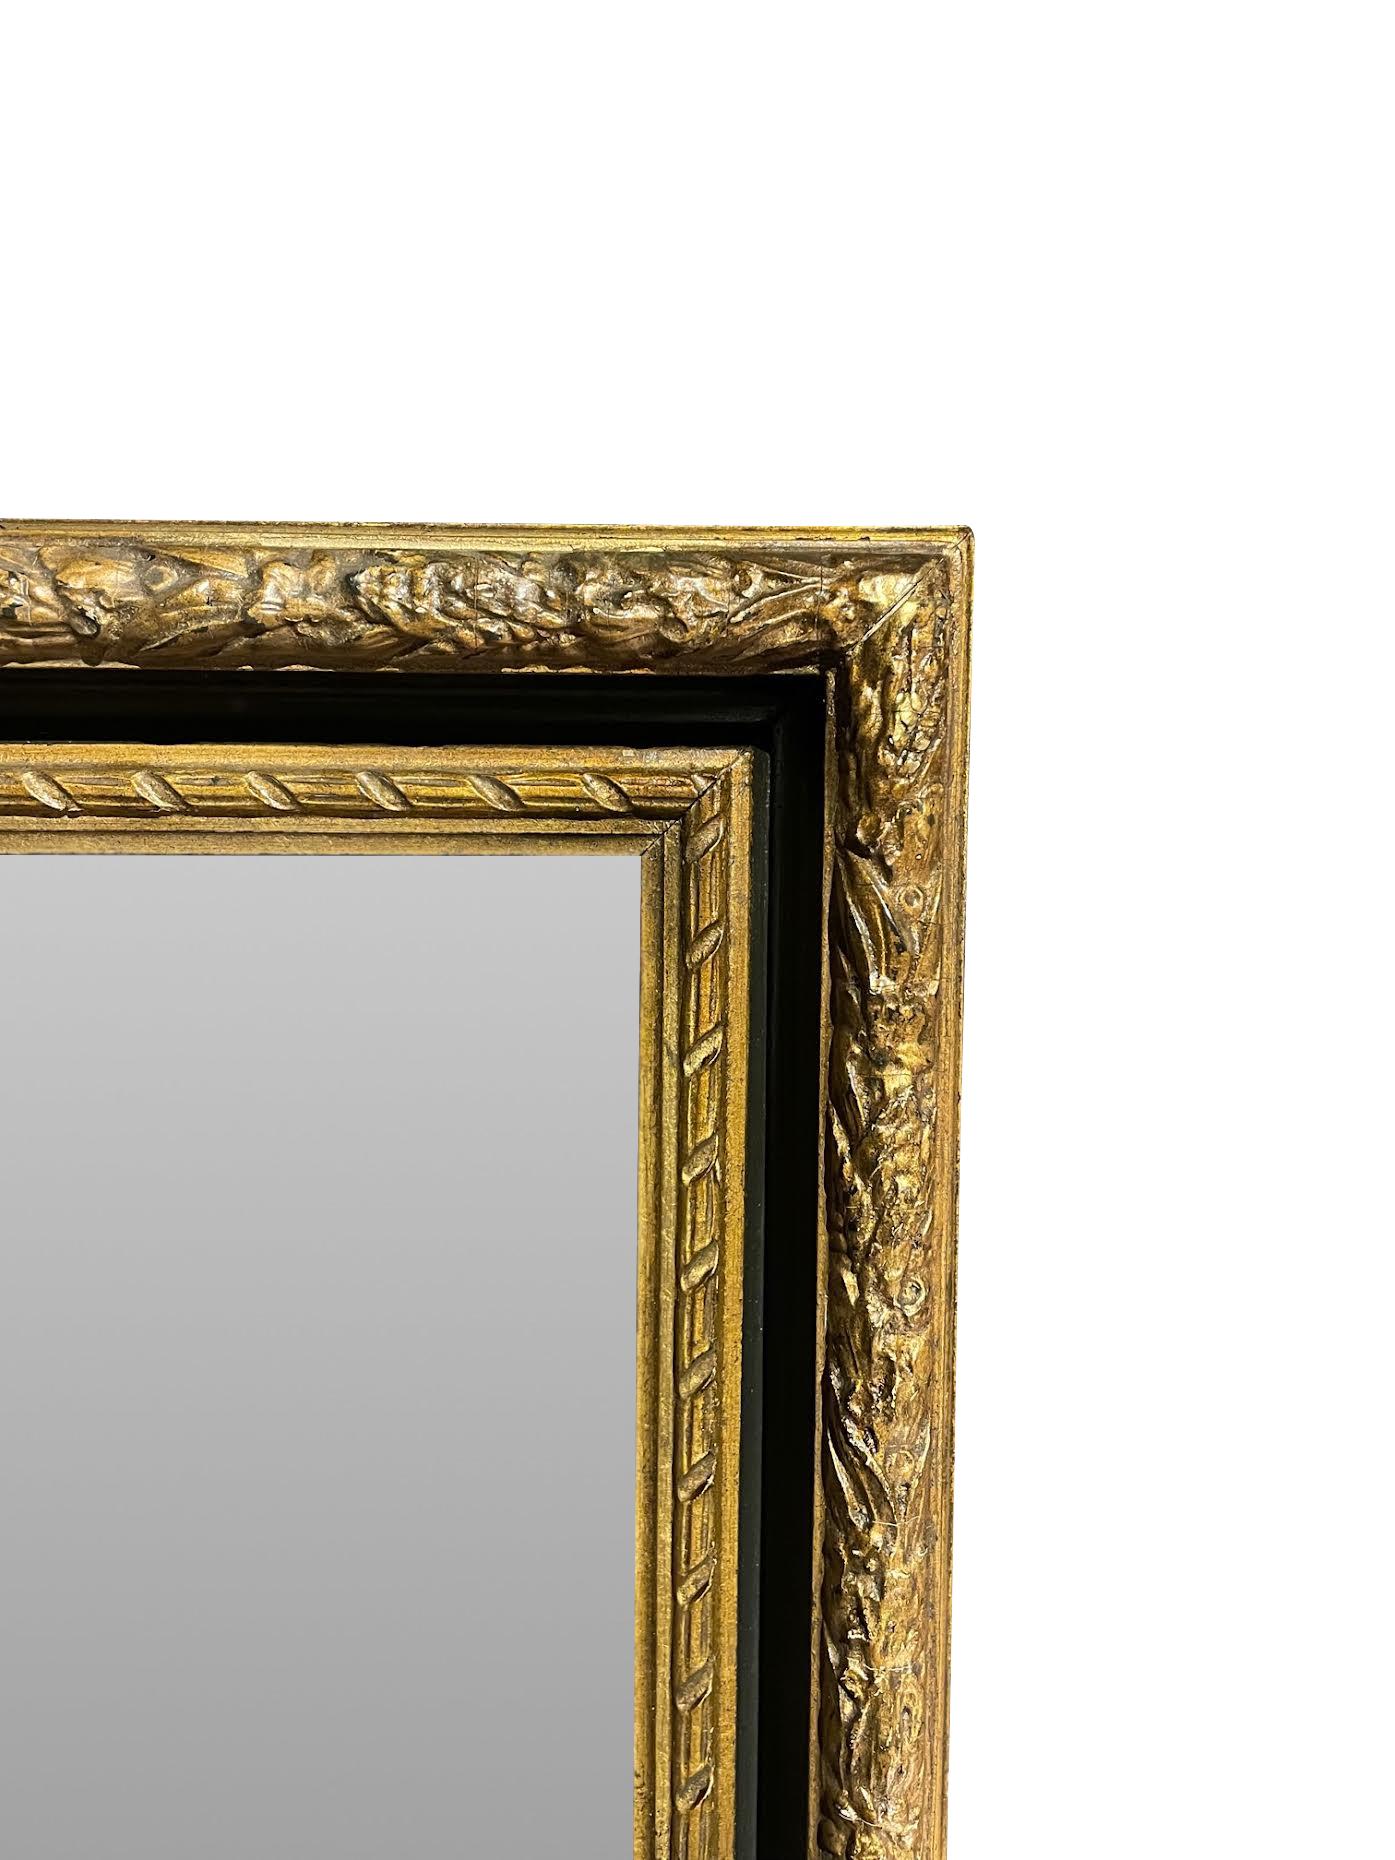 19th century French gold gilt and ebony frame mirror.
Scroll design.
New beveled mirror.